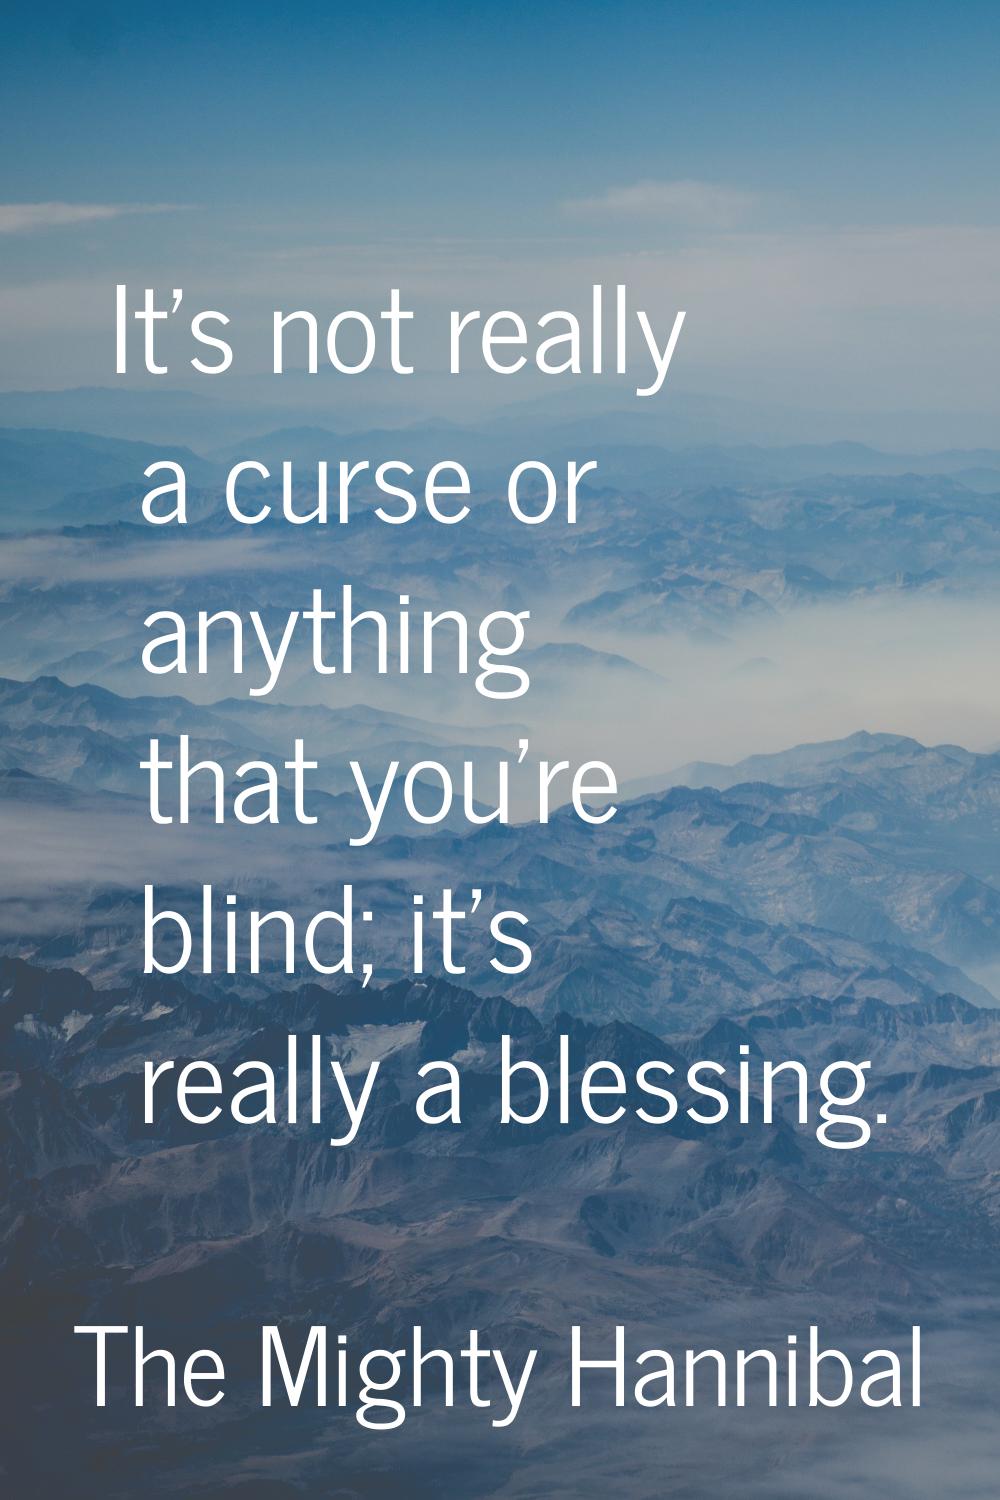 It's not really a curse or anything that you're blind; it's really a blessing.